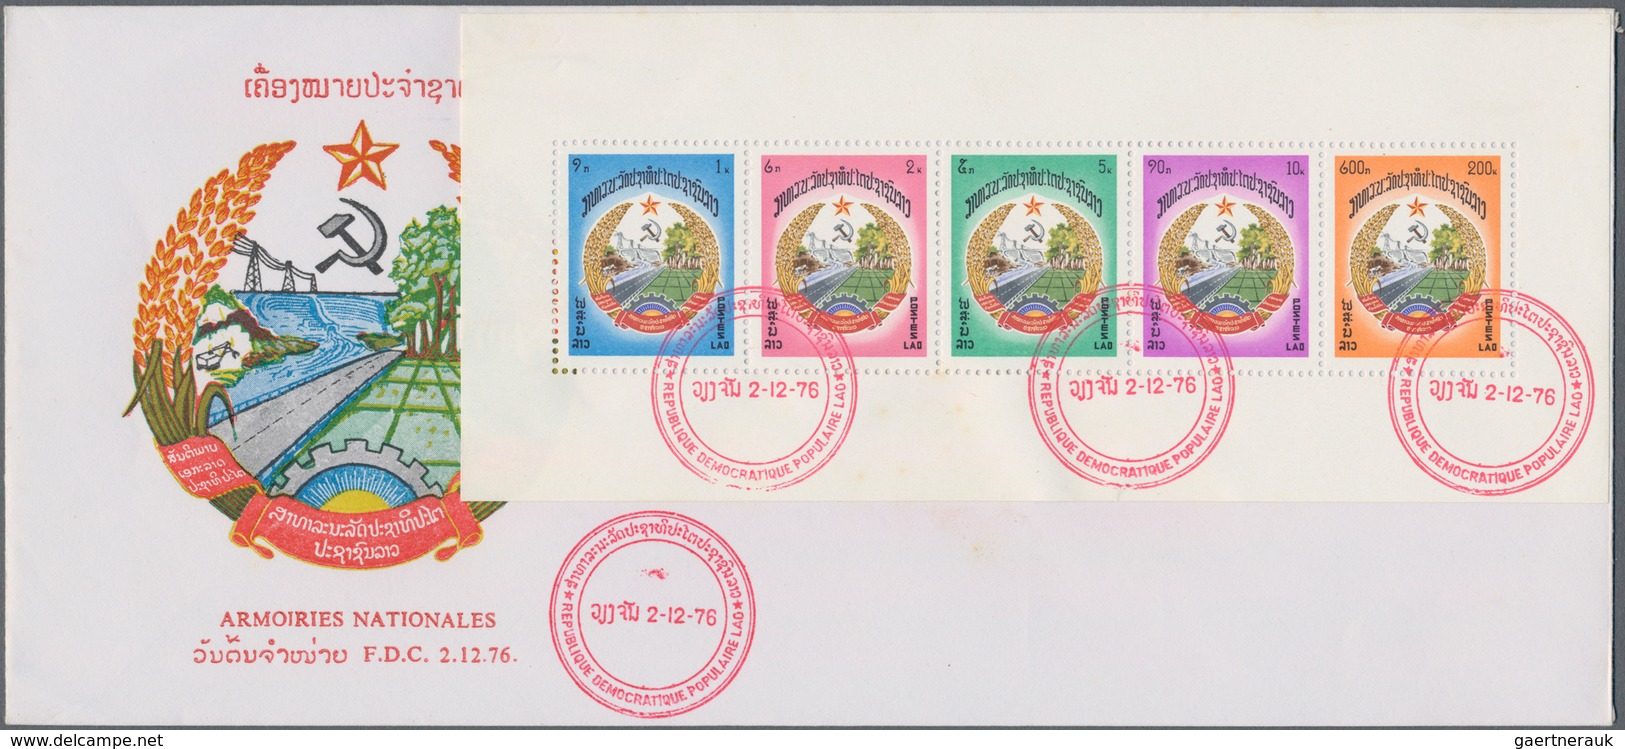 Laos: 1976, 1st Anniversary of People's Republic, group of nine covers: imperf. set on cacheted f.d.